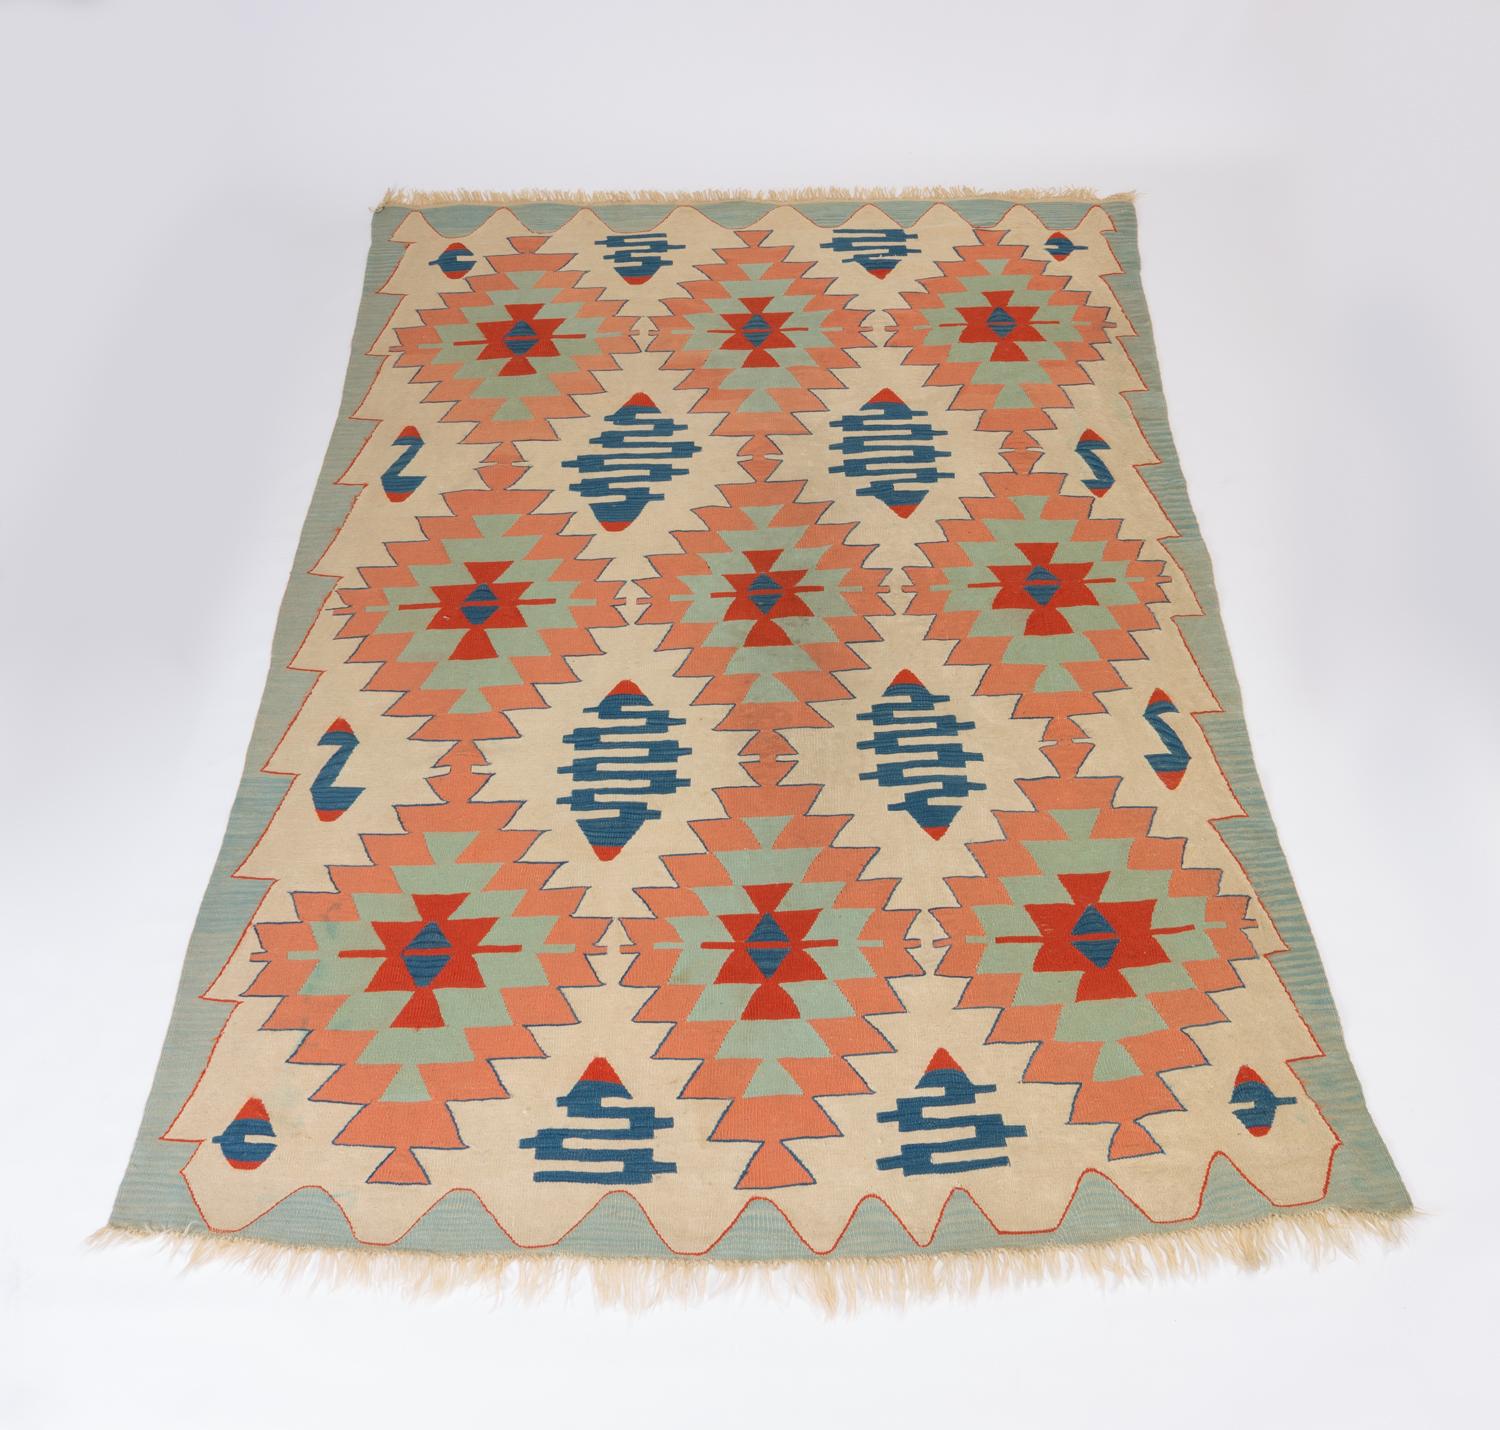 A large Turkish Kilim rug in a muted color palette on a soft, ivory field. This rug is woven with protective motifs in salmon pink, sky blue, terra cotta, and aquamarine hues. 

Condition: Good vintage condition; professionally cleaned. Some